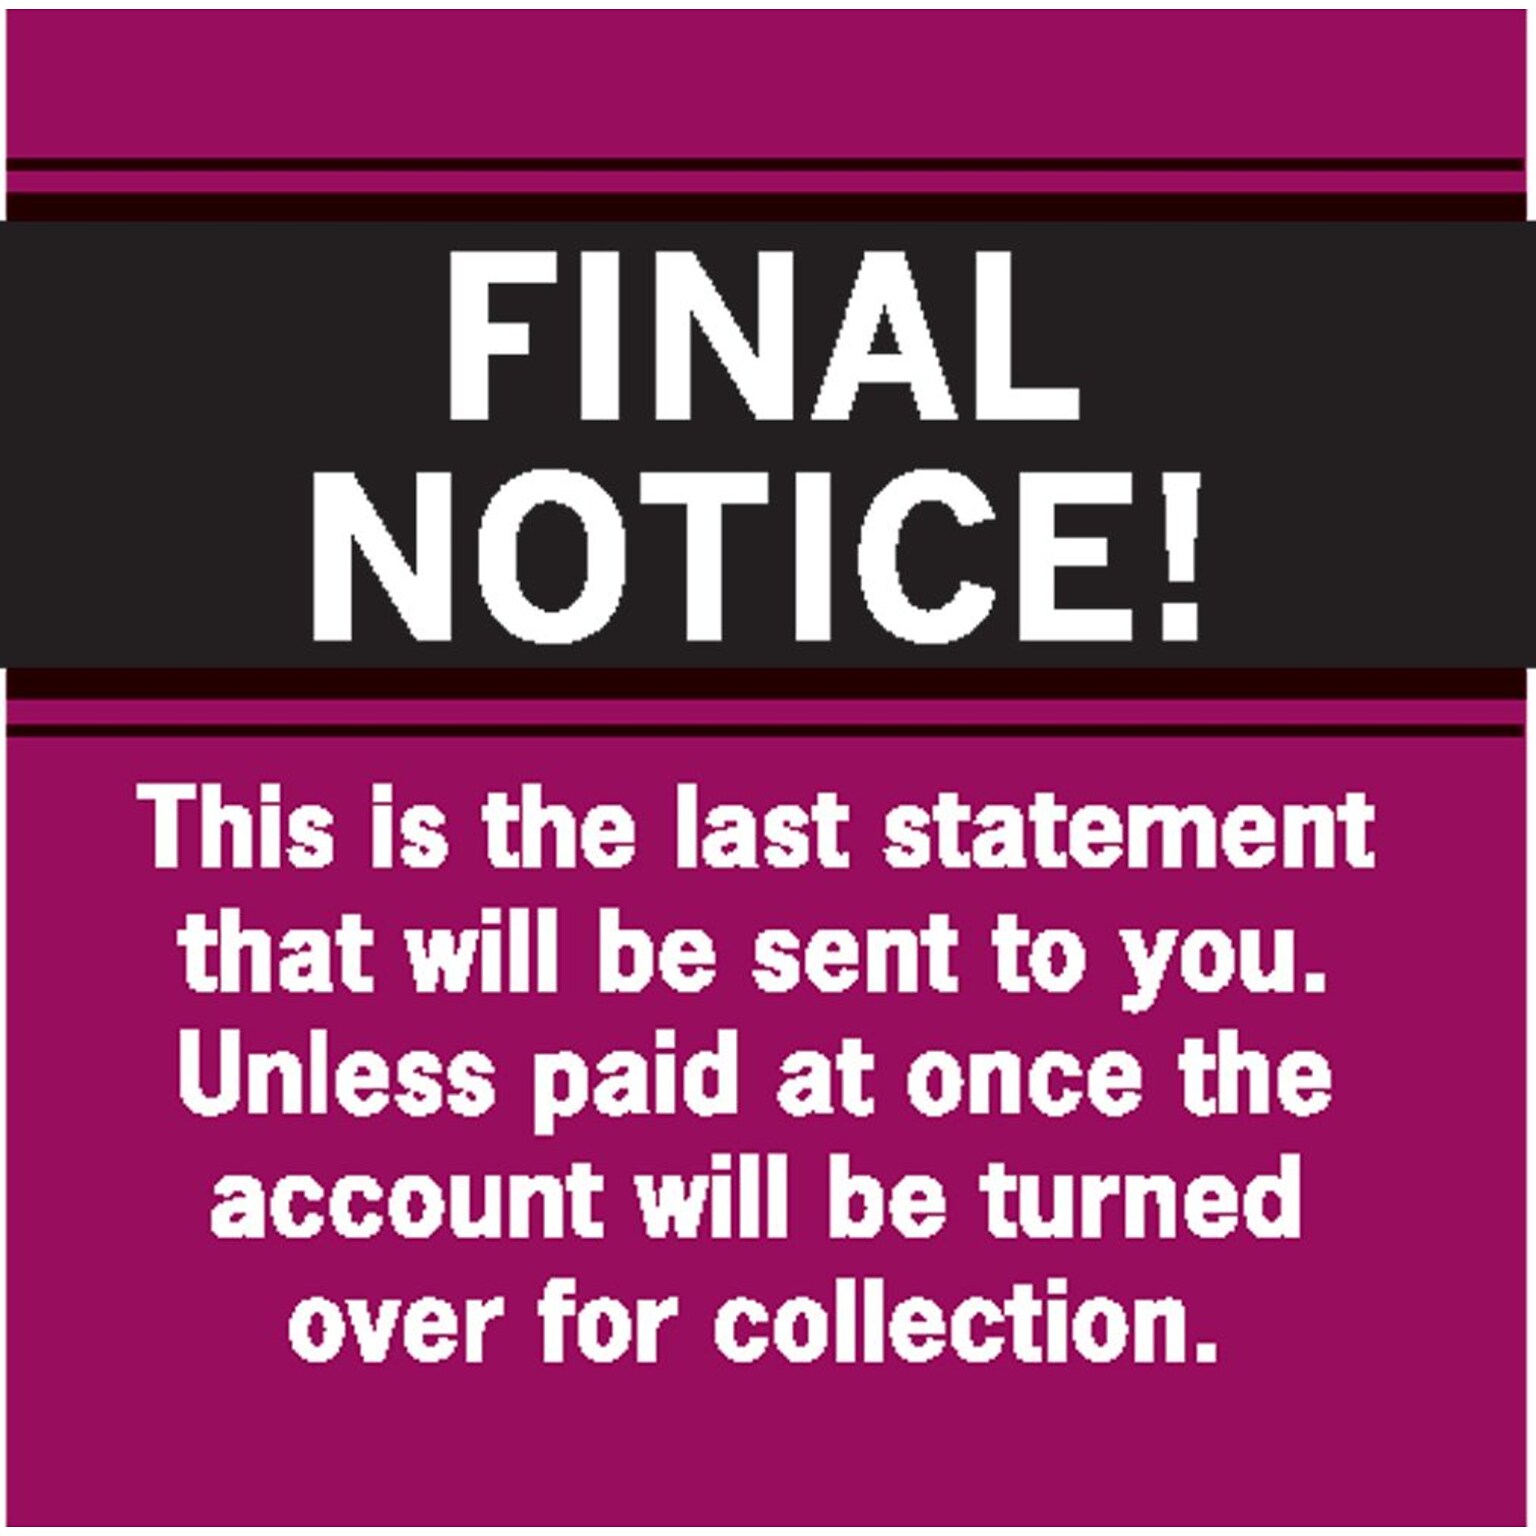 Medical Arts Press® Past Due Collection Labels, Final Notice!....Last Statement, Red, 1-1/2x1-1/2, 500 Labels